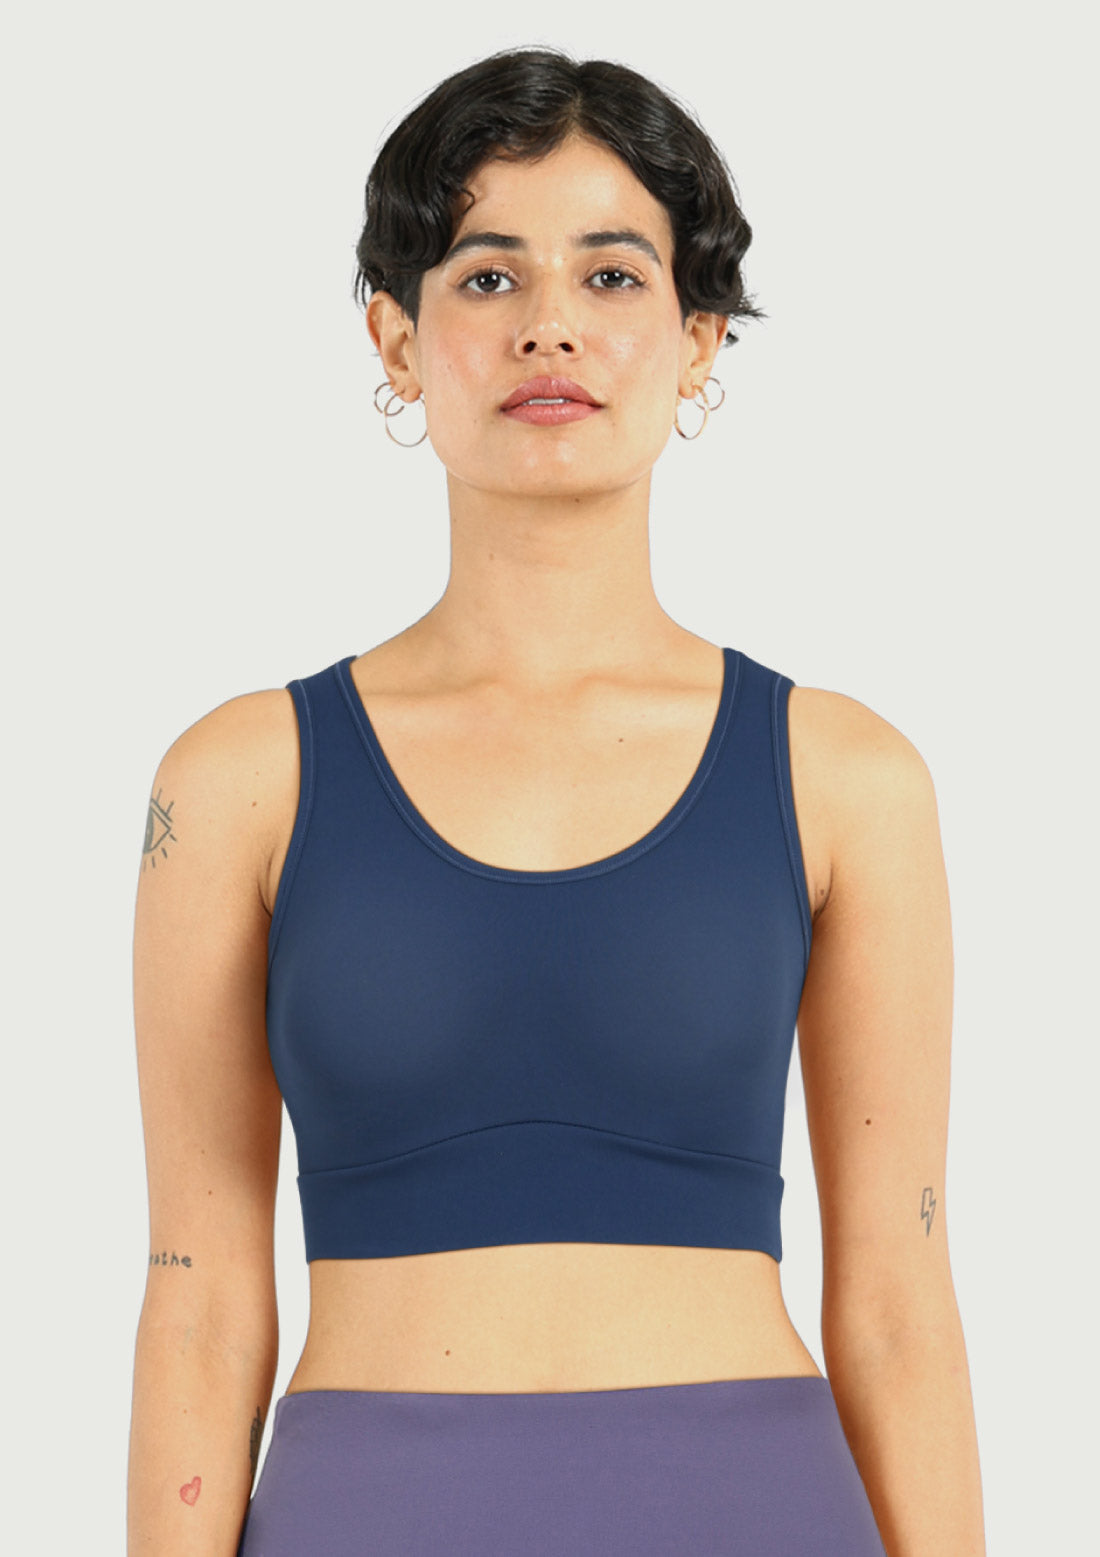 All Access Strappy Low Impact Bra in Navy